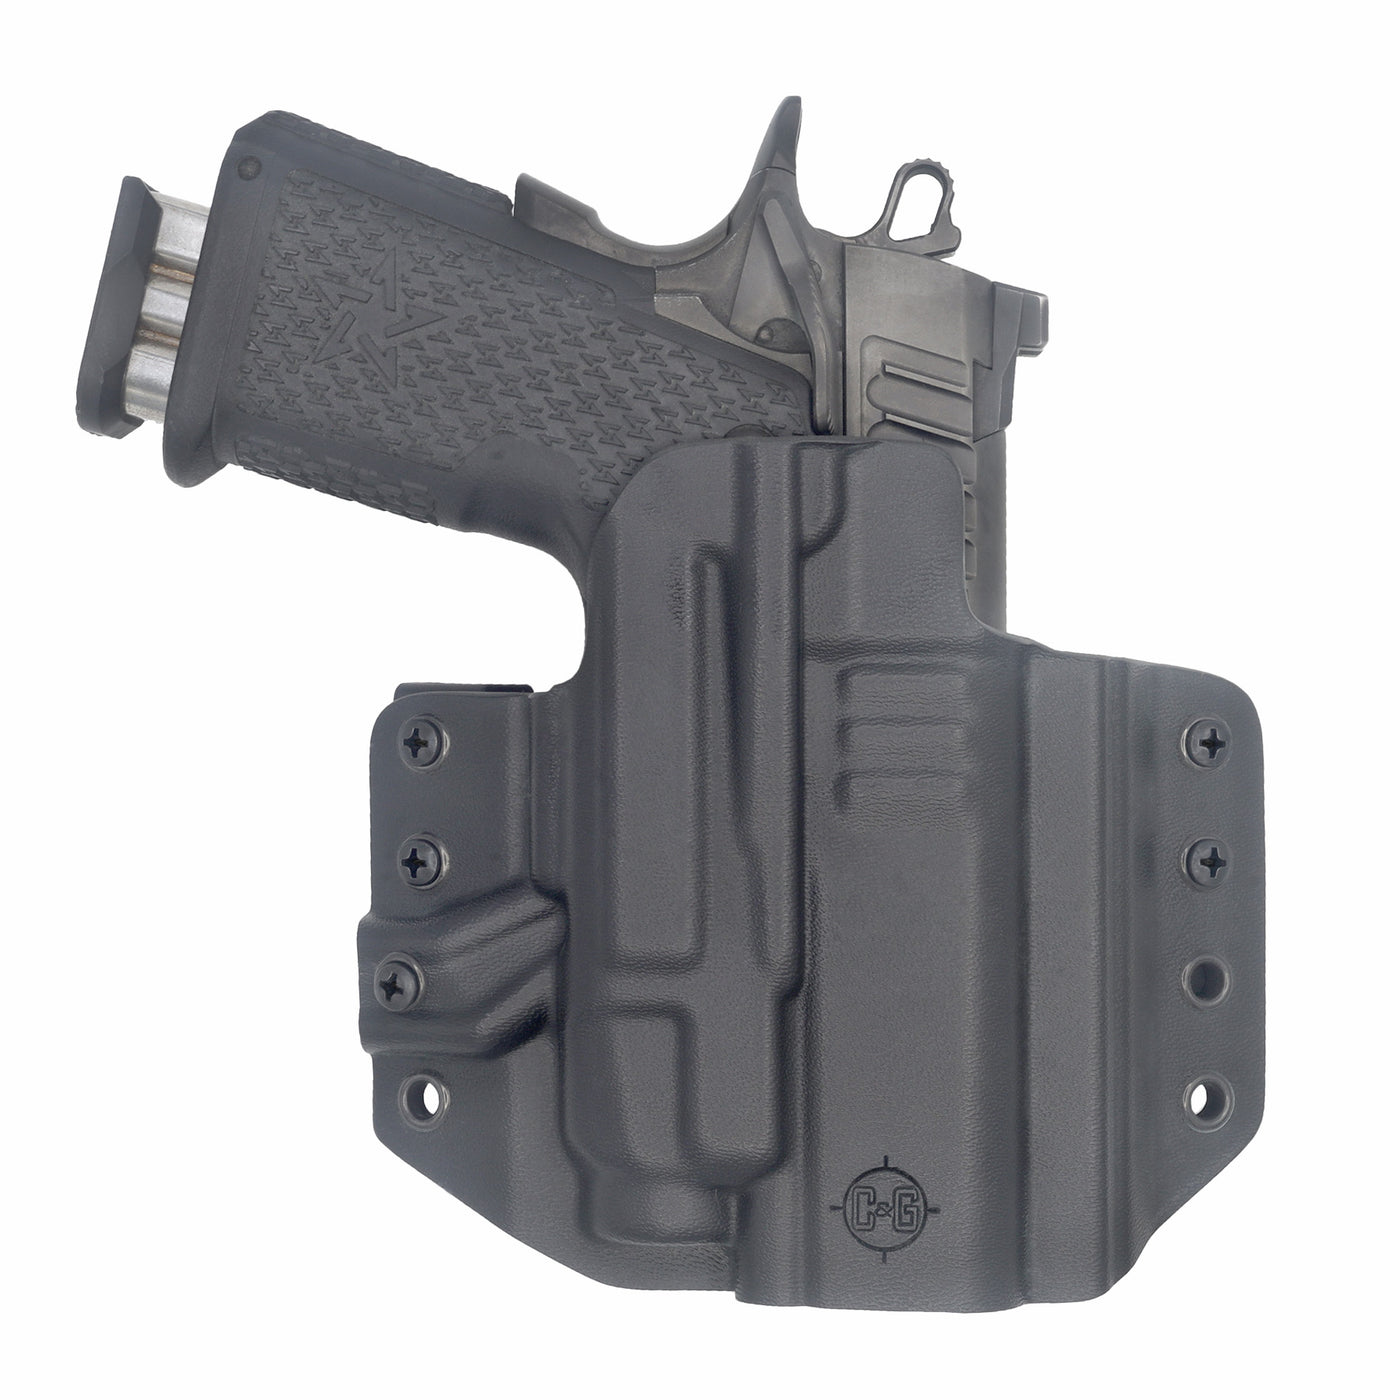 C&G Holsters Quickship OWB Tactical 2011 Streamlight TLR7/a in holstered position